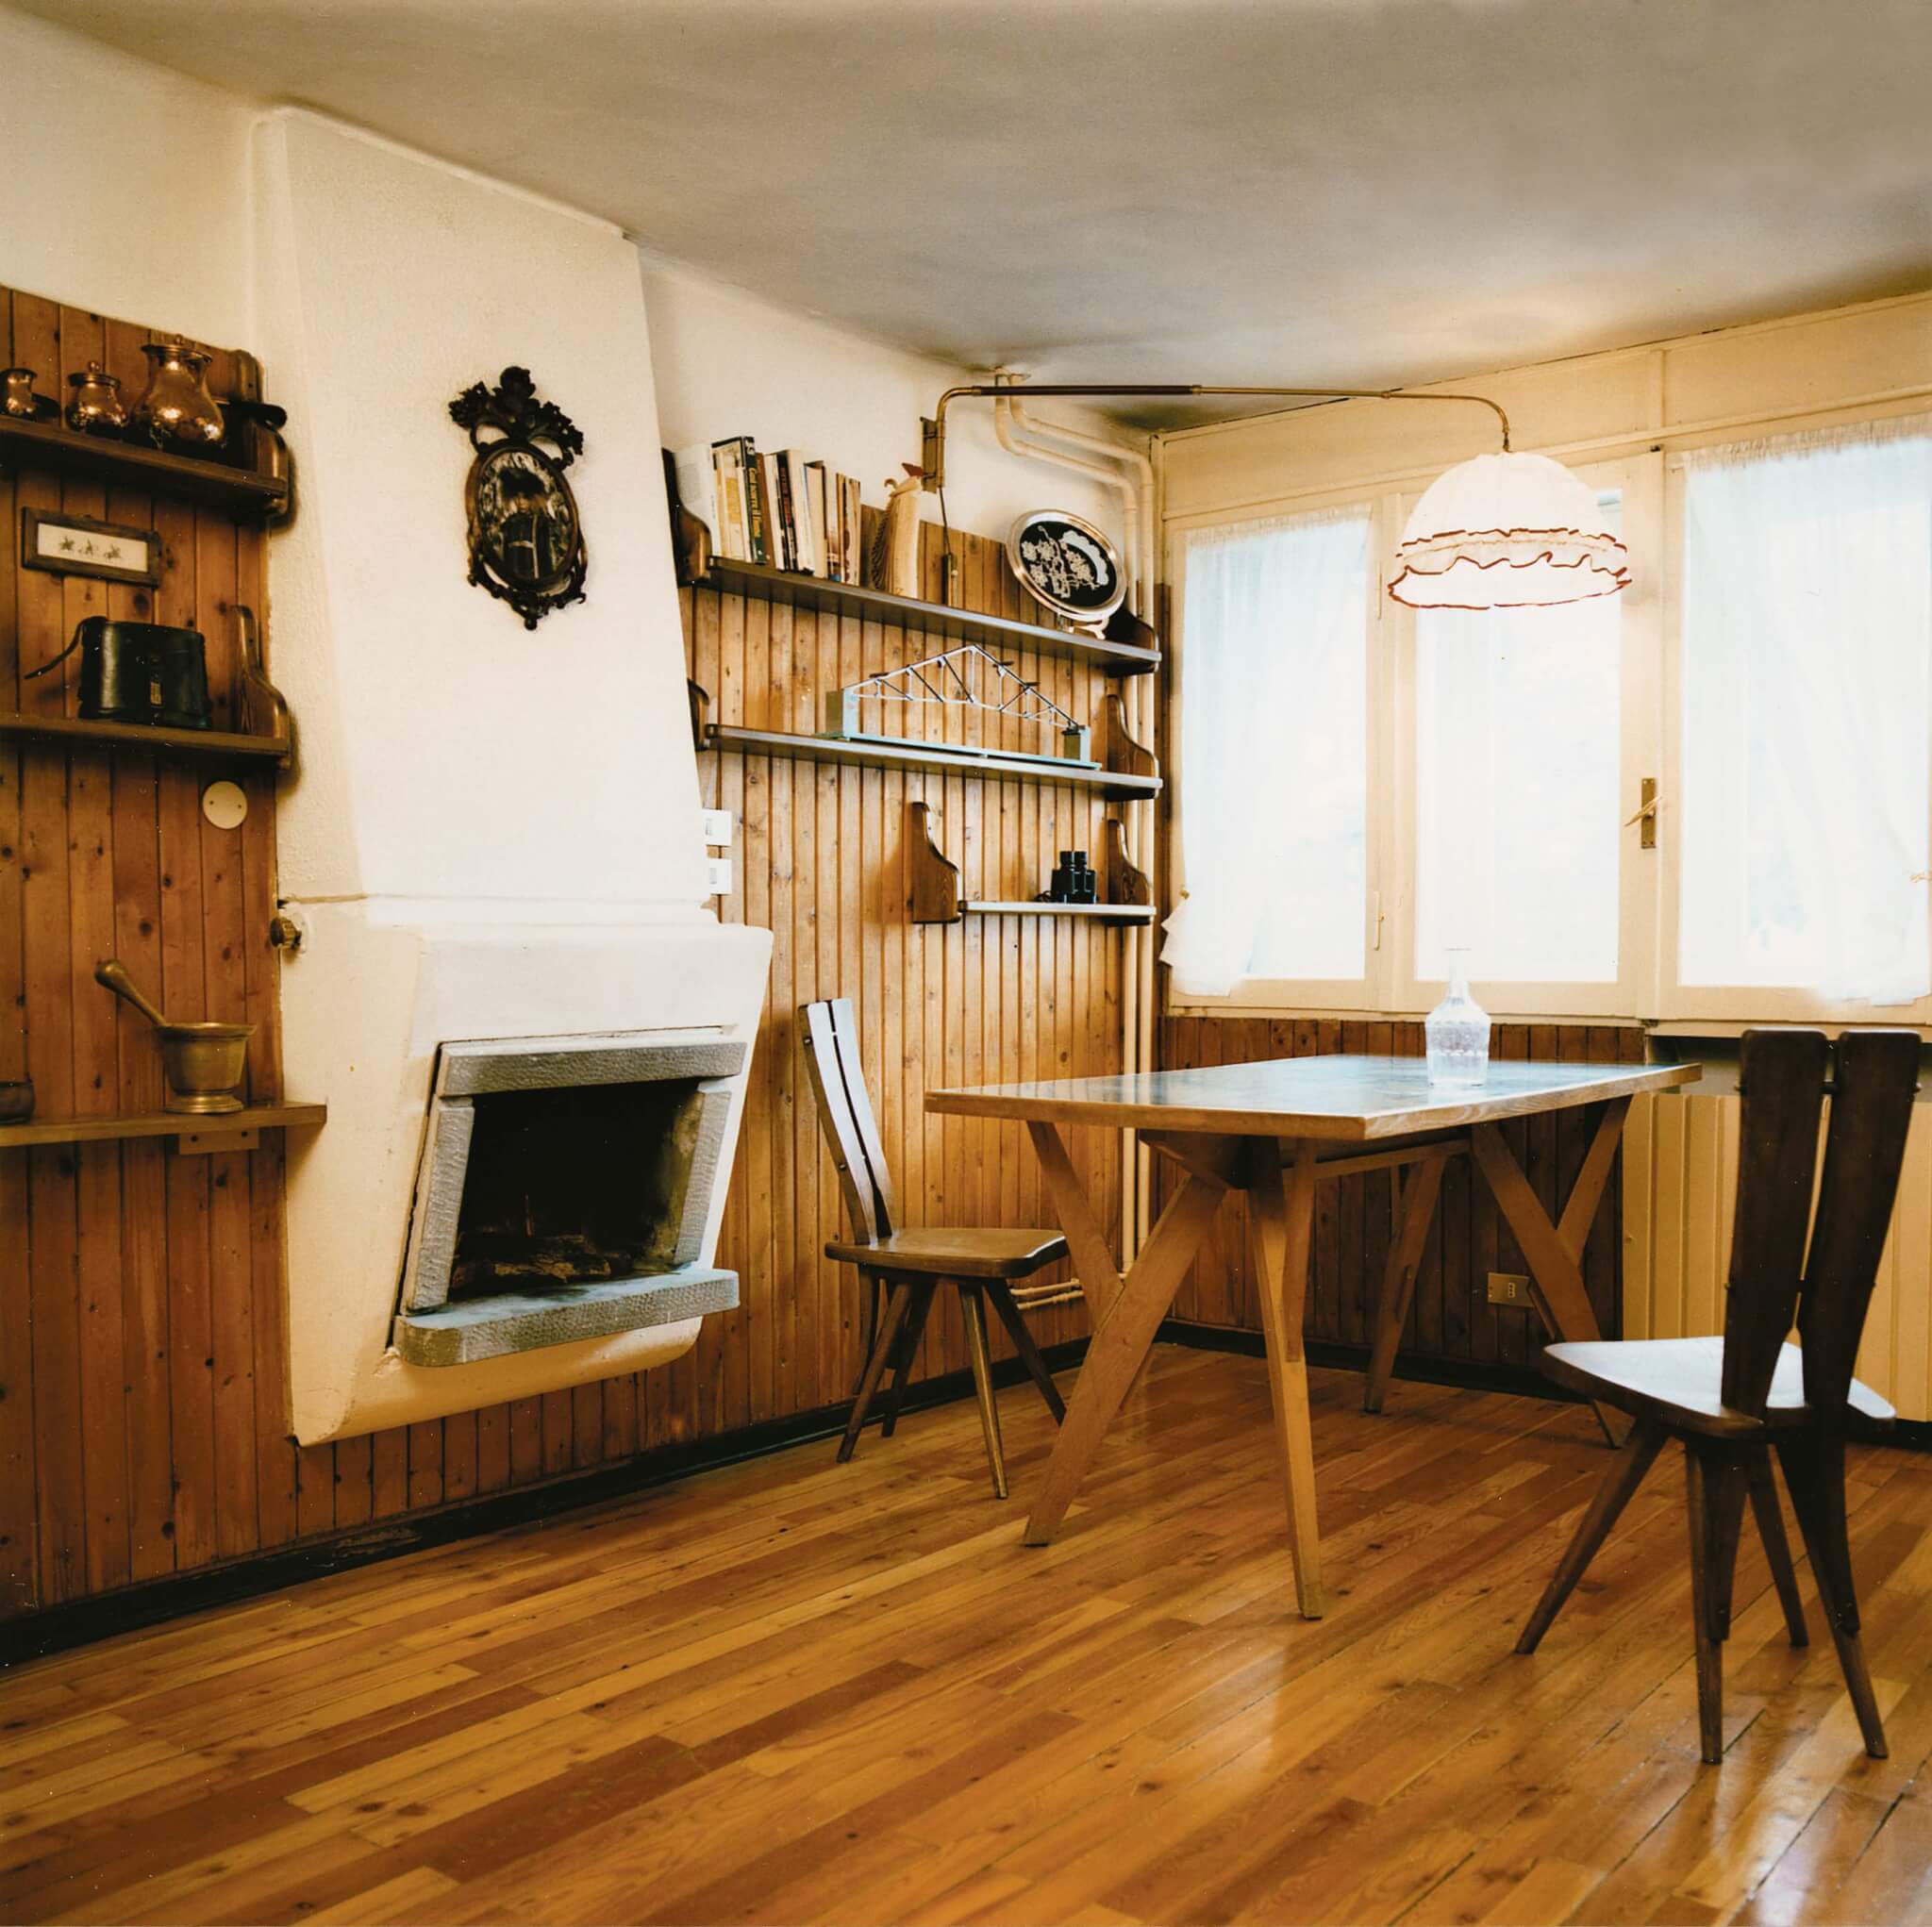 interior wood floor with shelves and table